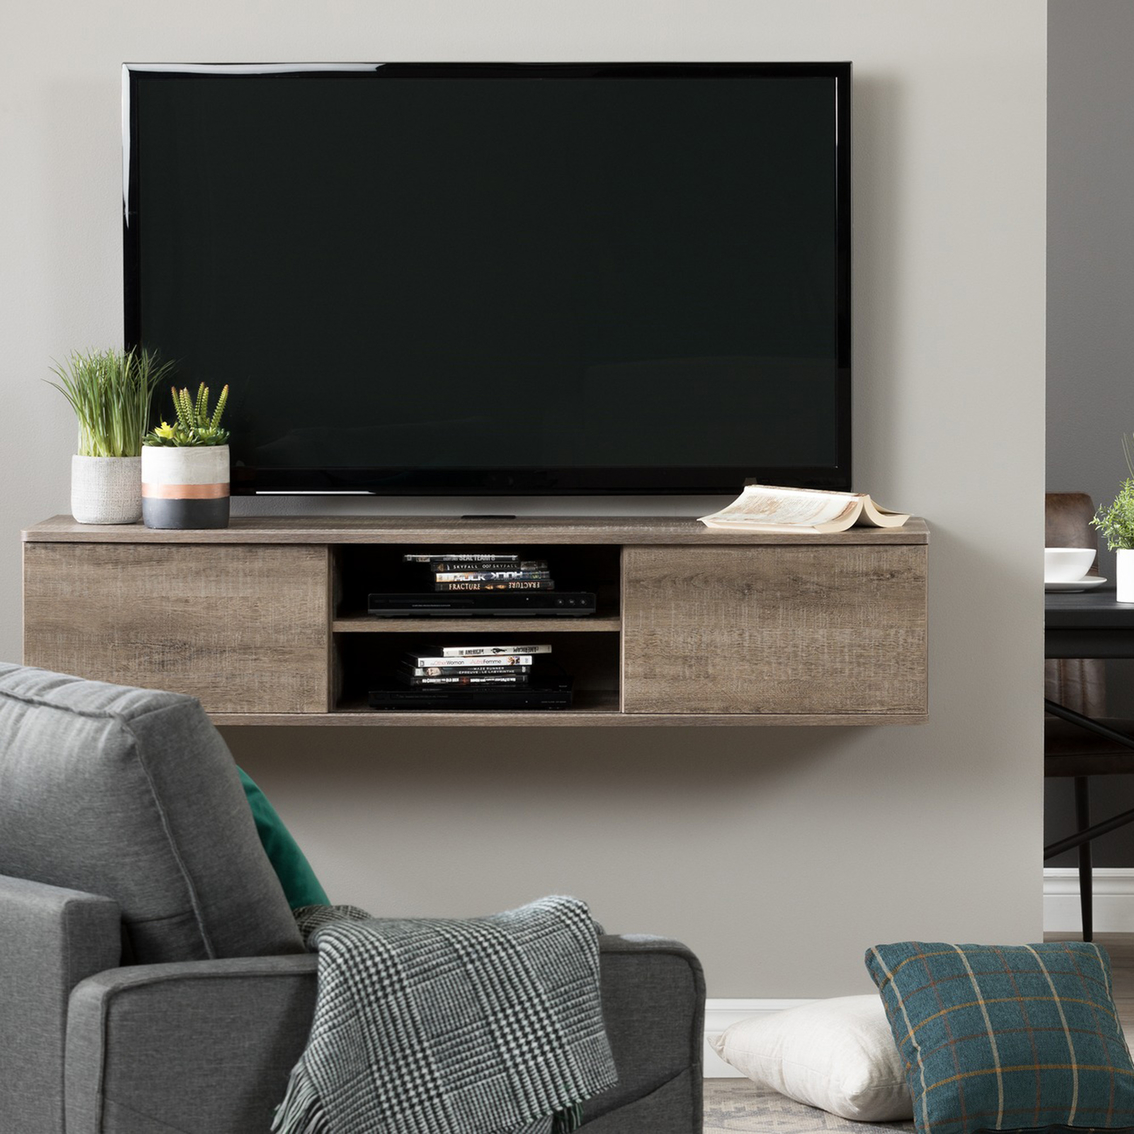 South Shore Agora 56 in. Wall Mounted Media Console - Image 3 of 7